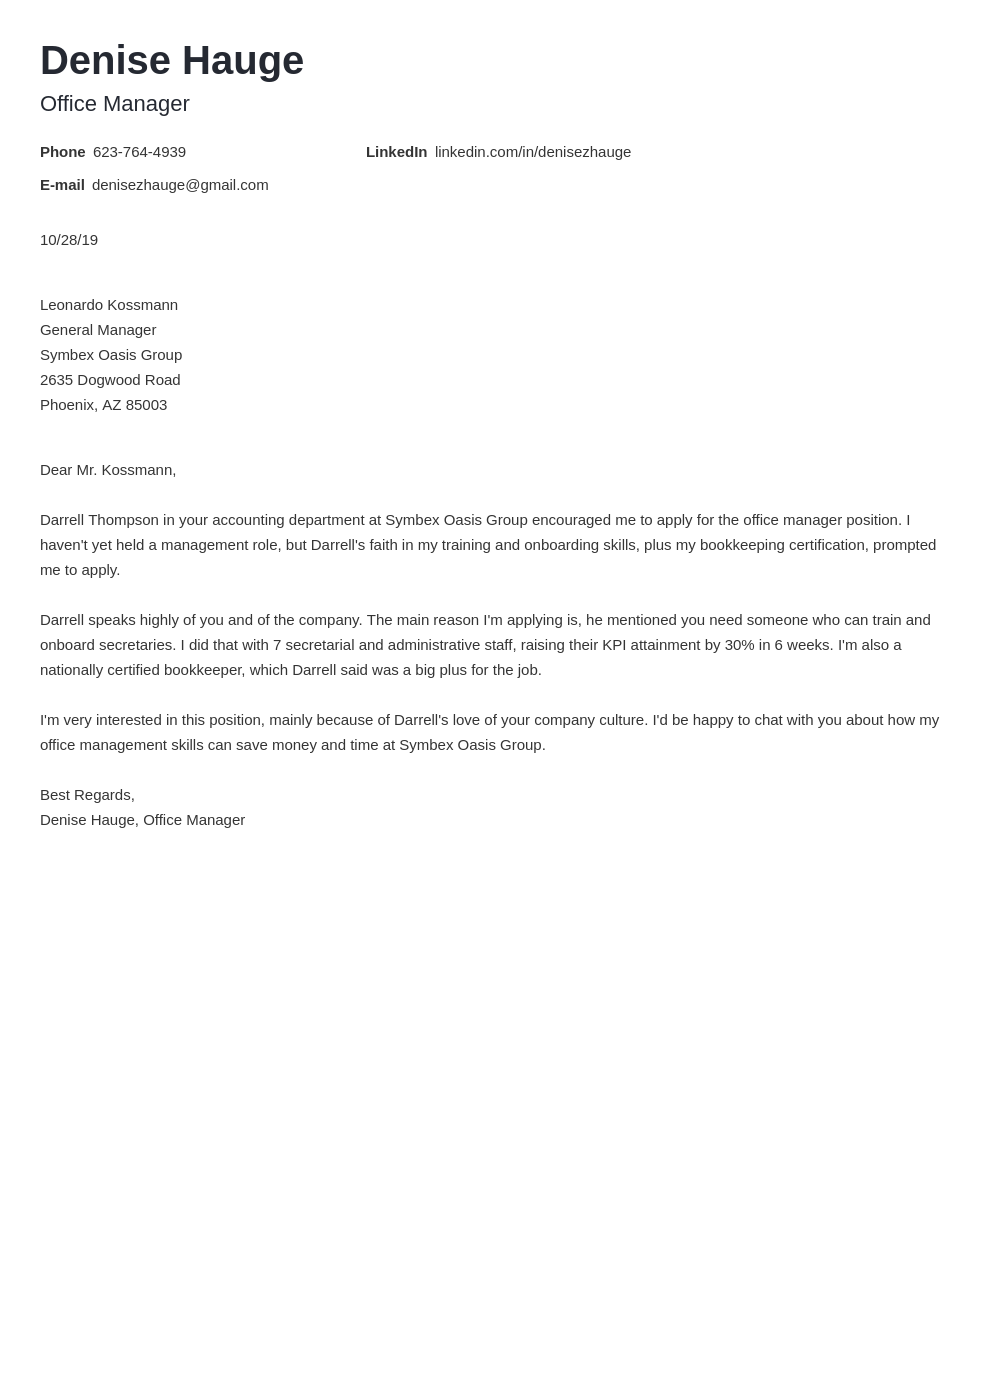 Office Manager Cover Letter: Examples & Ready-to-Use Templates